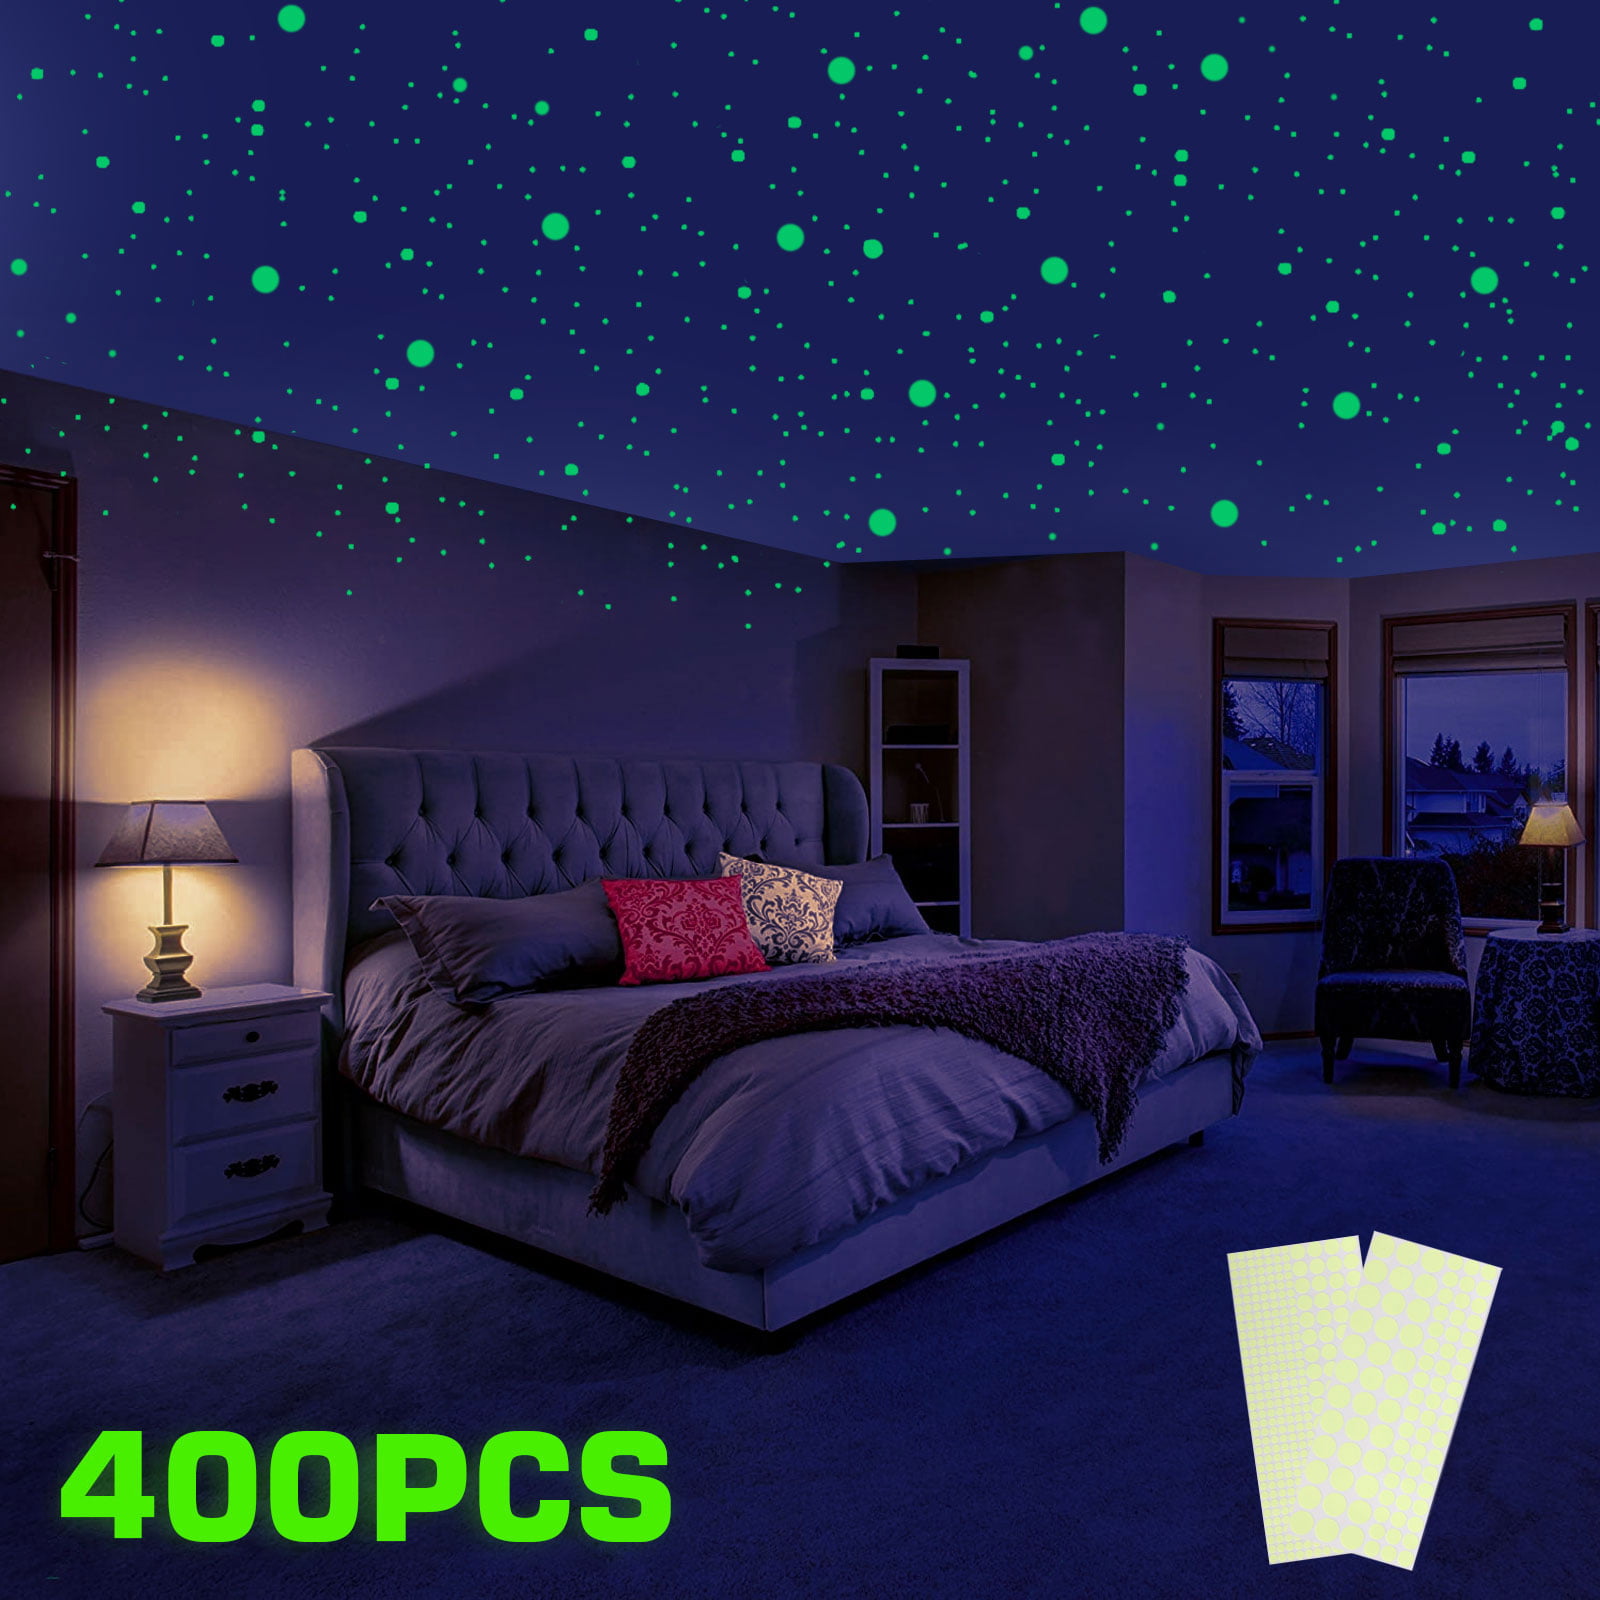 Details about  / Lots Luminous Stars Glow In The Dark Sticker Wall Decal Kid Baby Bedroom